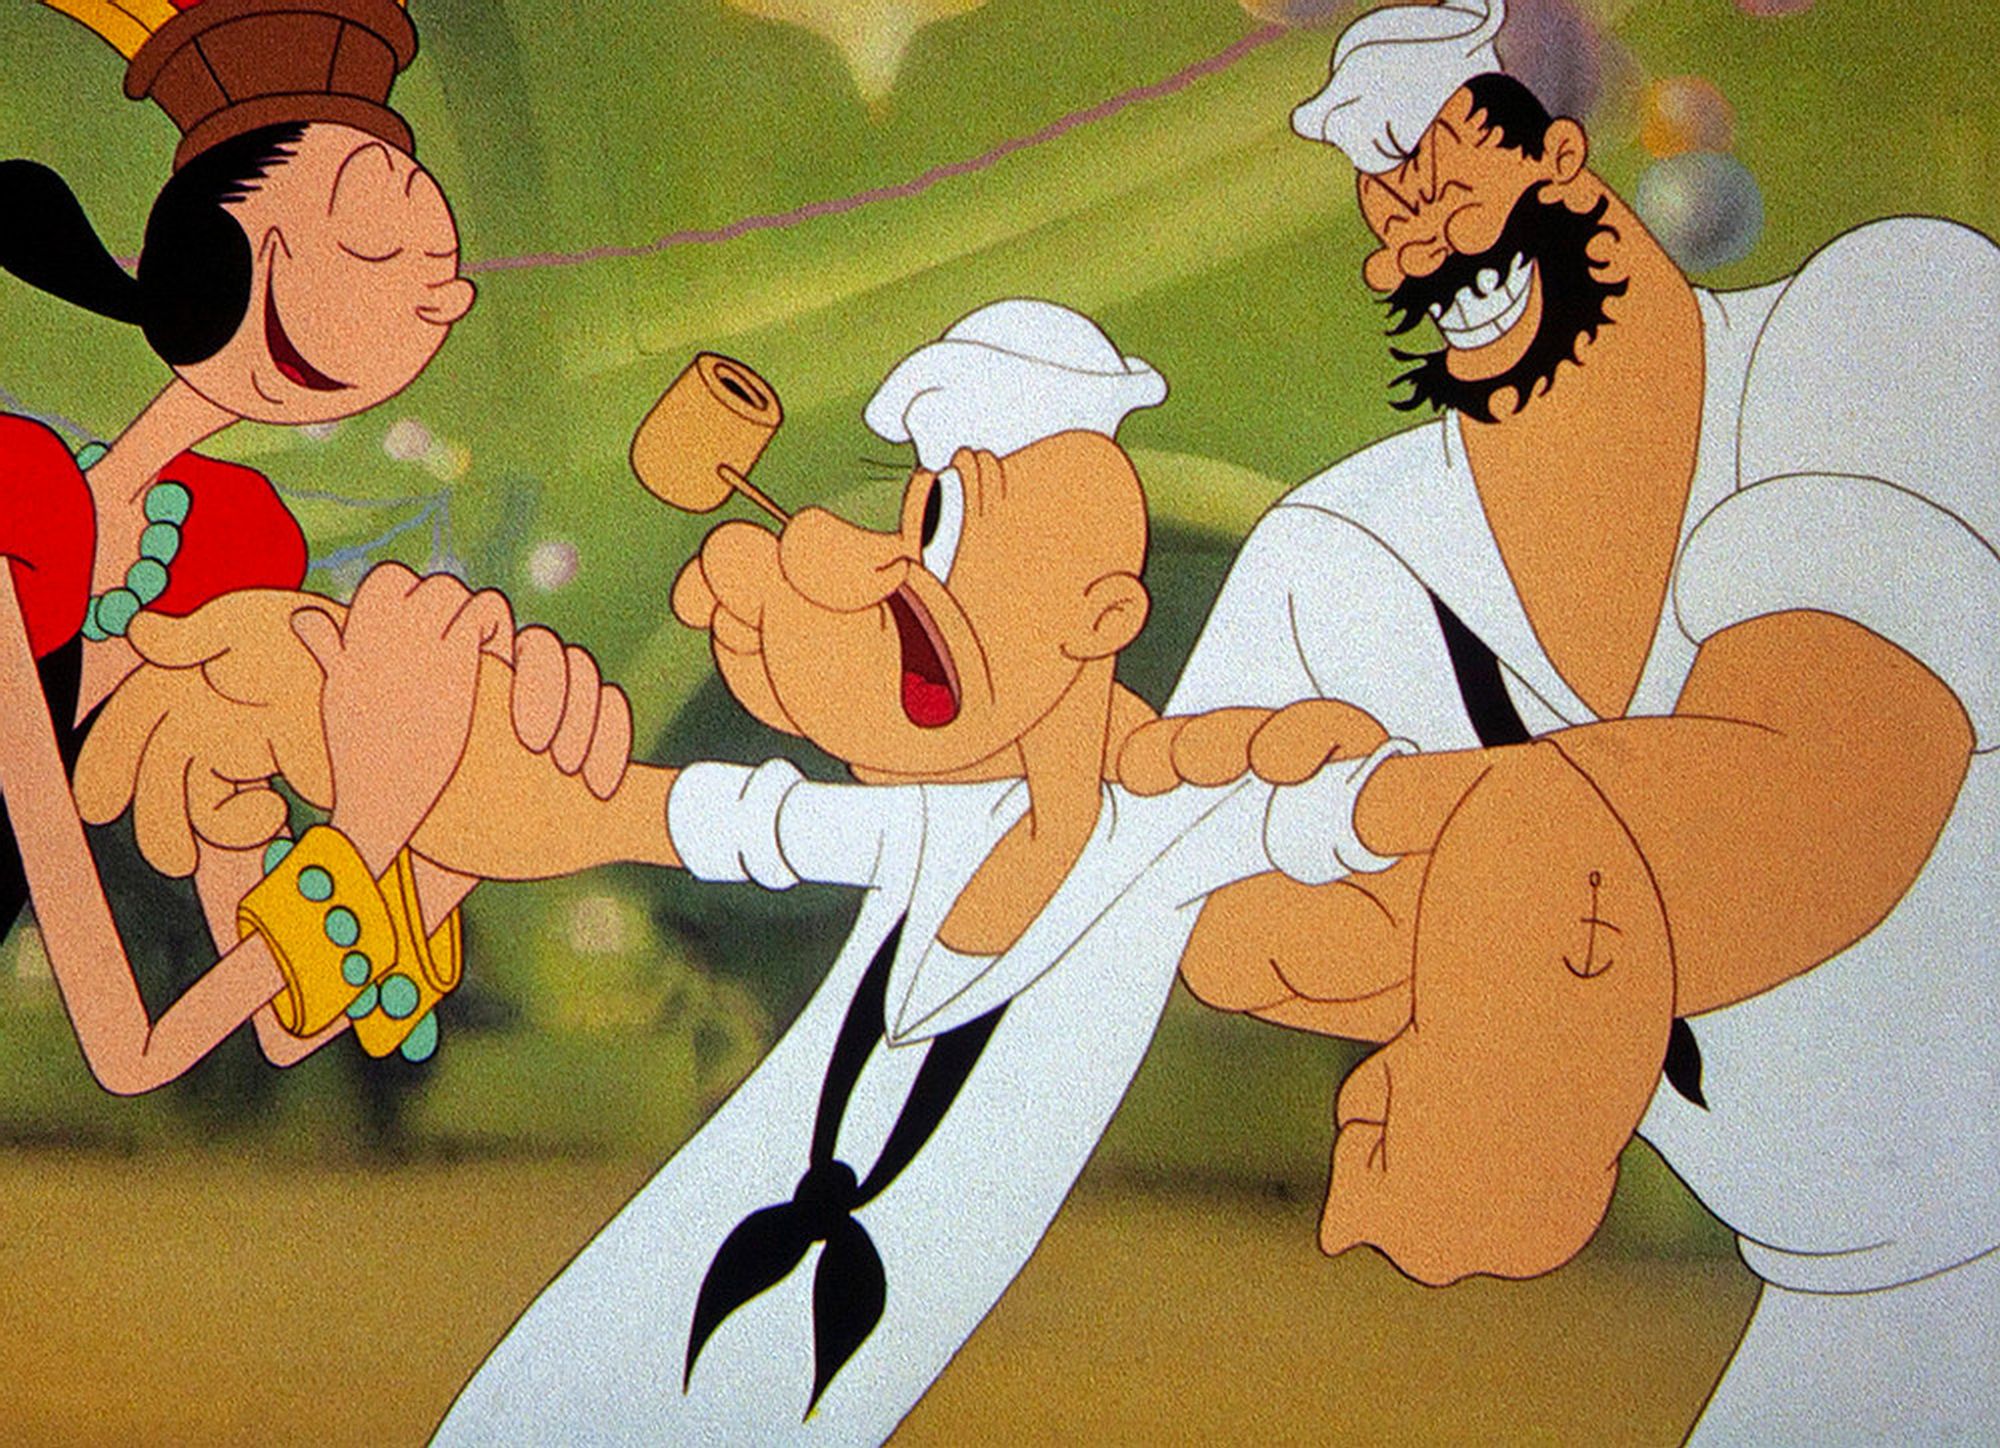 Olive tries to drag poor Popeye onto the dance floor, while Bluto looks on in delight